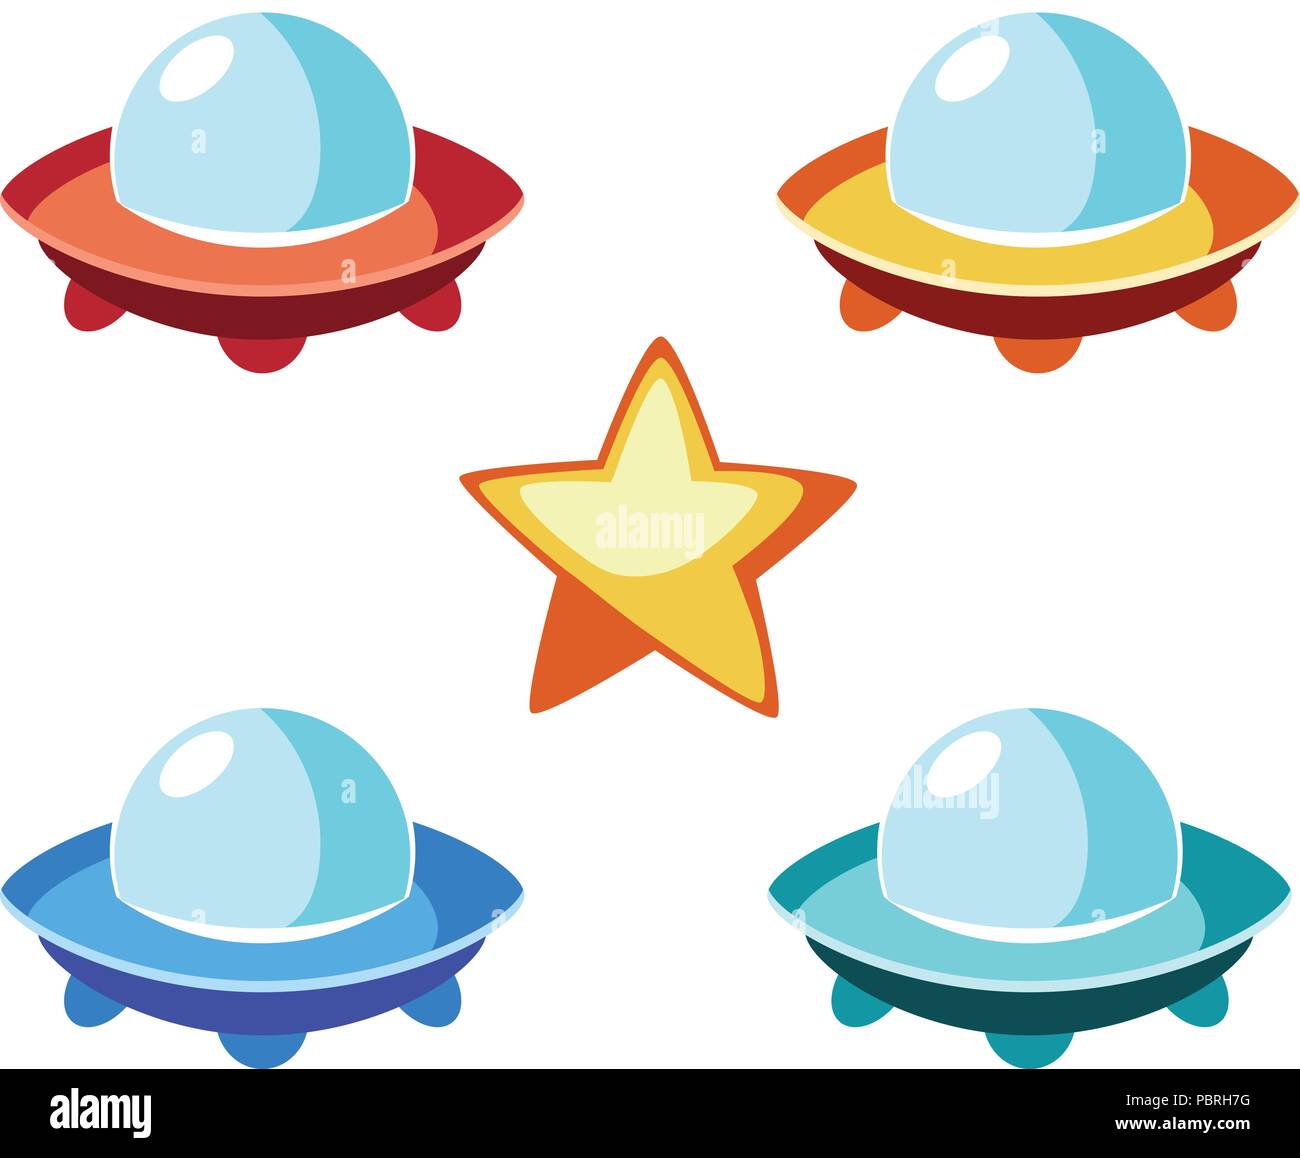 Illustration of cartoon flying saucers in different colors and ...